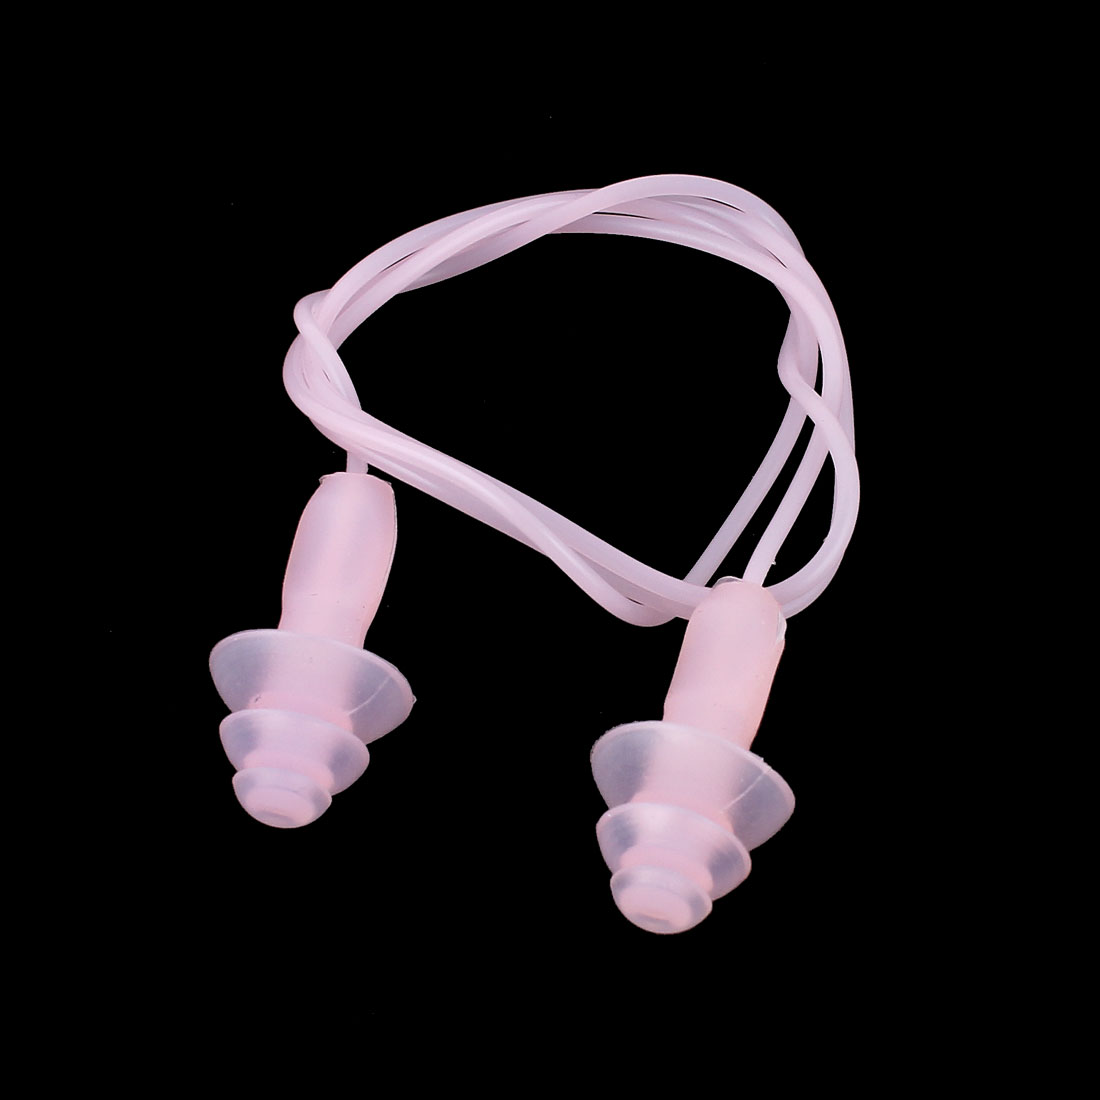 Unique Bargains 3 Pairs Soft Silicone Water Block Corded Swimming Earplugs Ear Plugs Pink